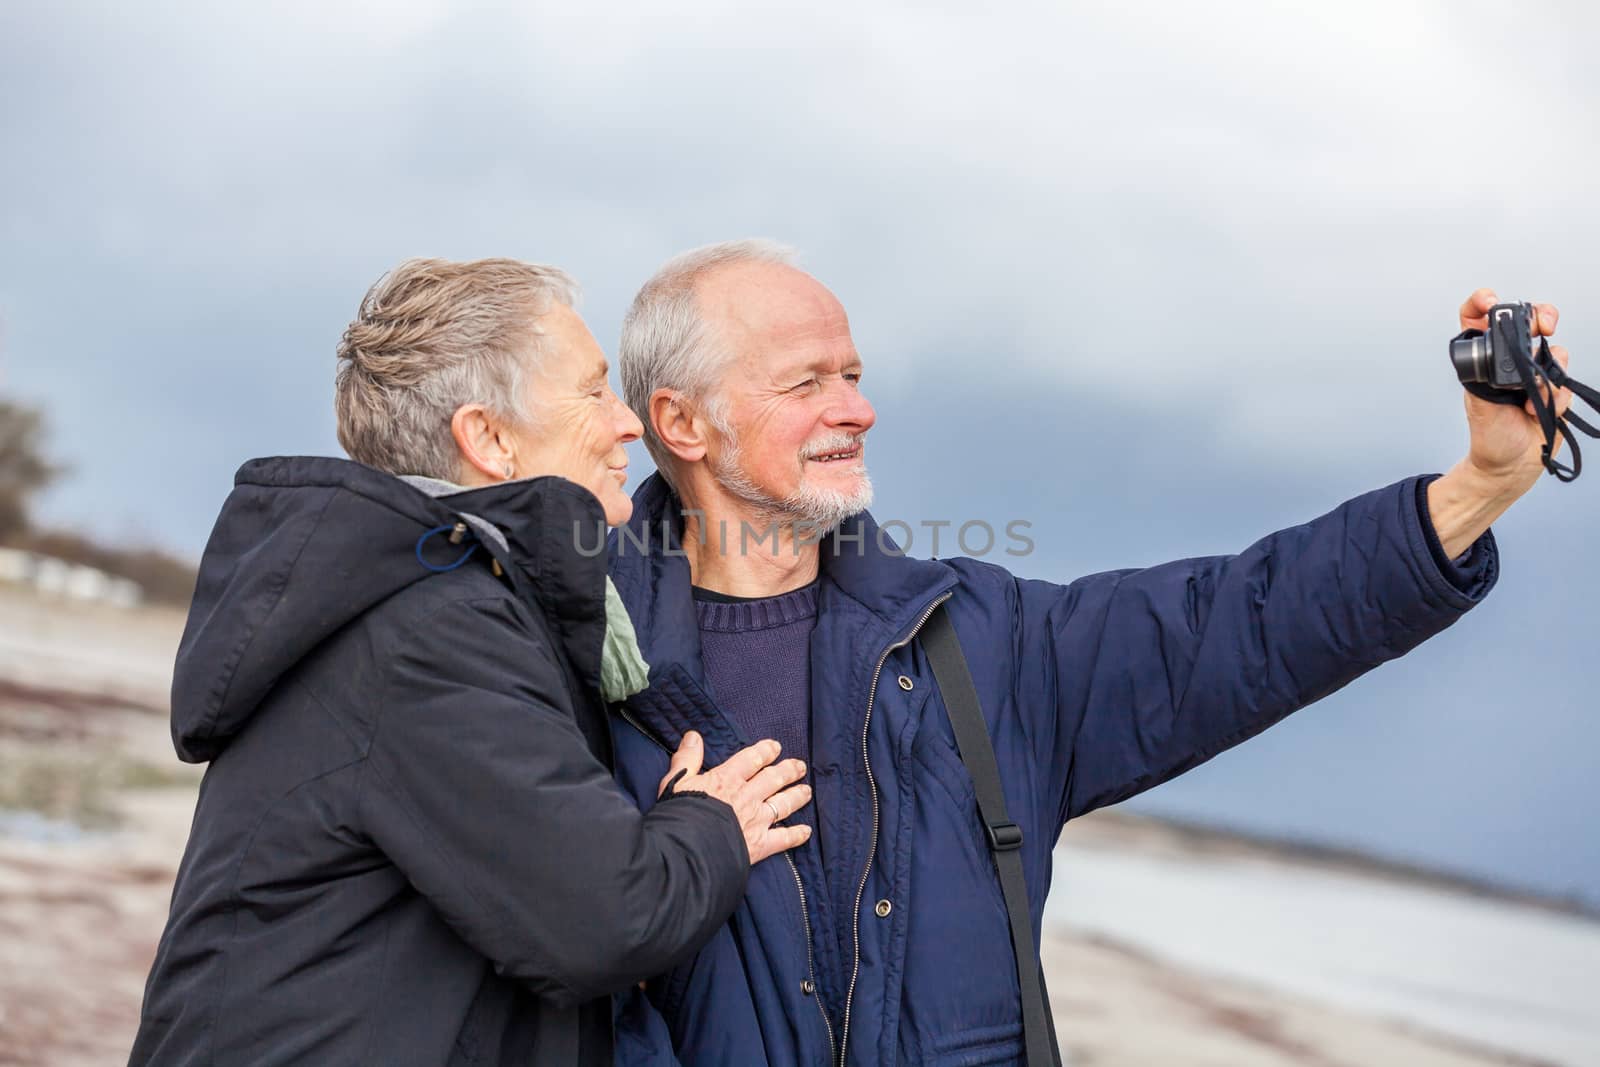 Elderly couple taking a self portrait on a compact digital camera posing in the open air and sunshine with their heads close together smiling at the lens